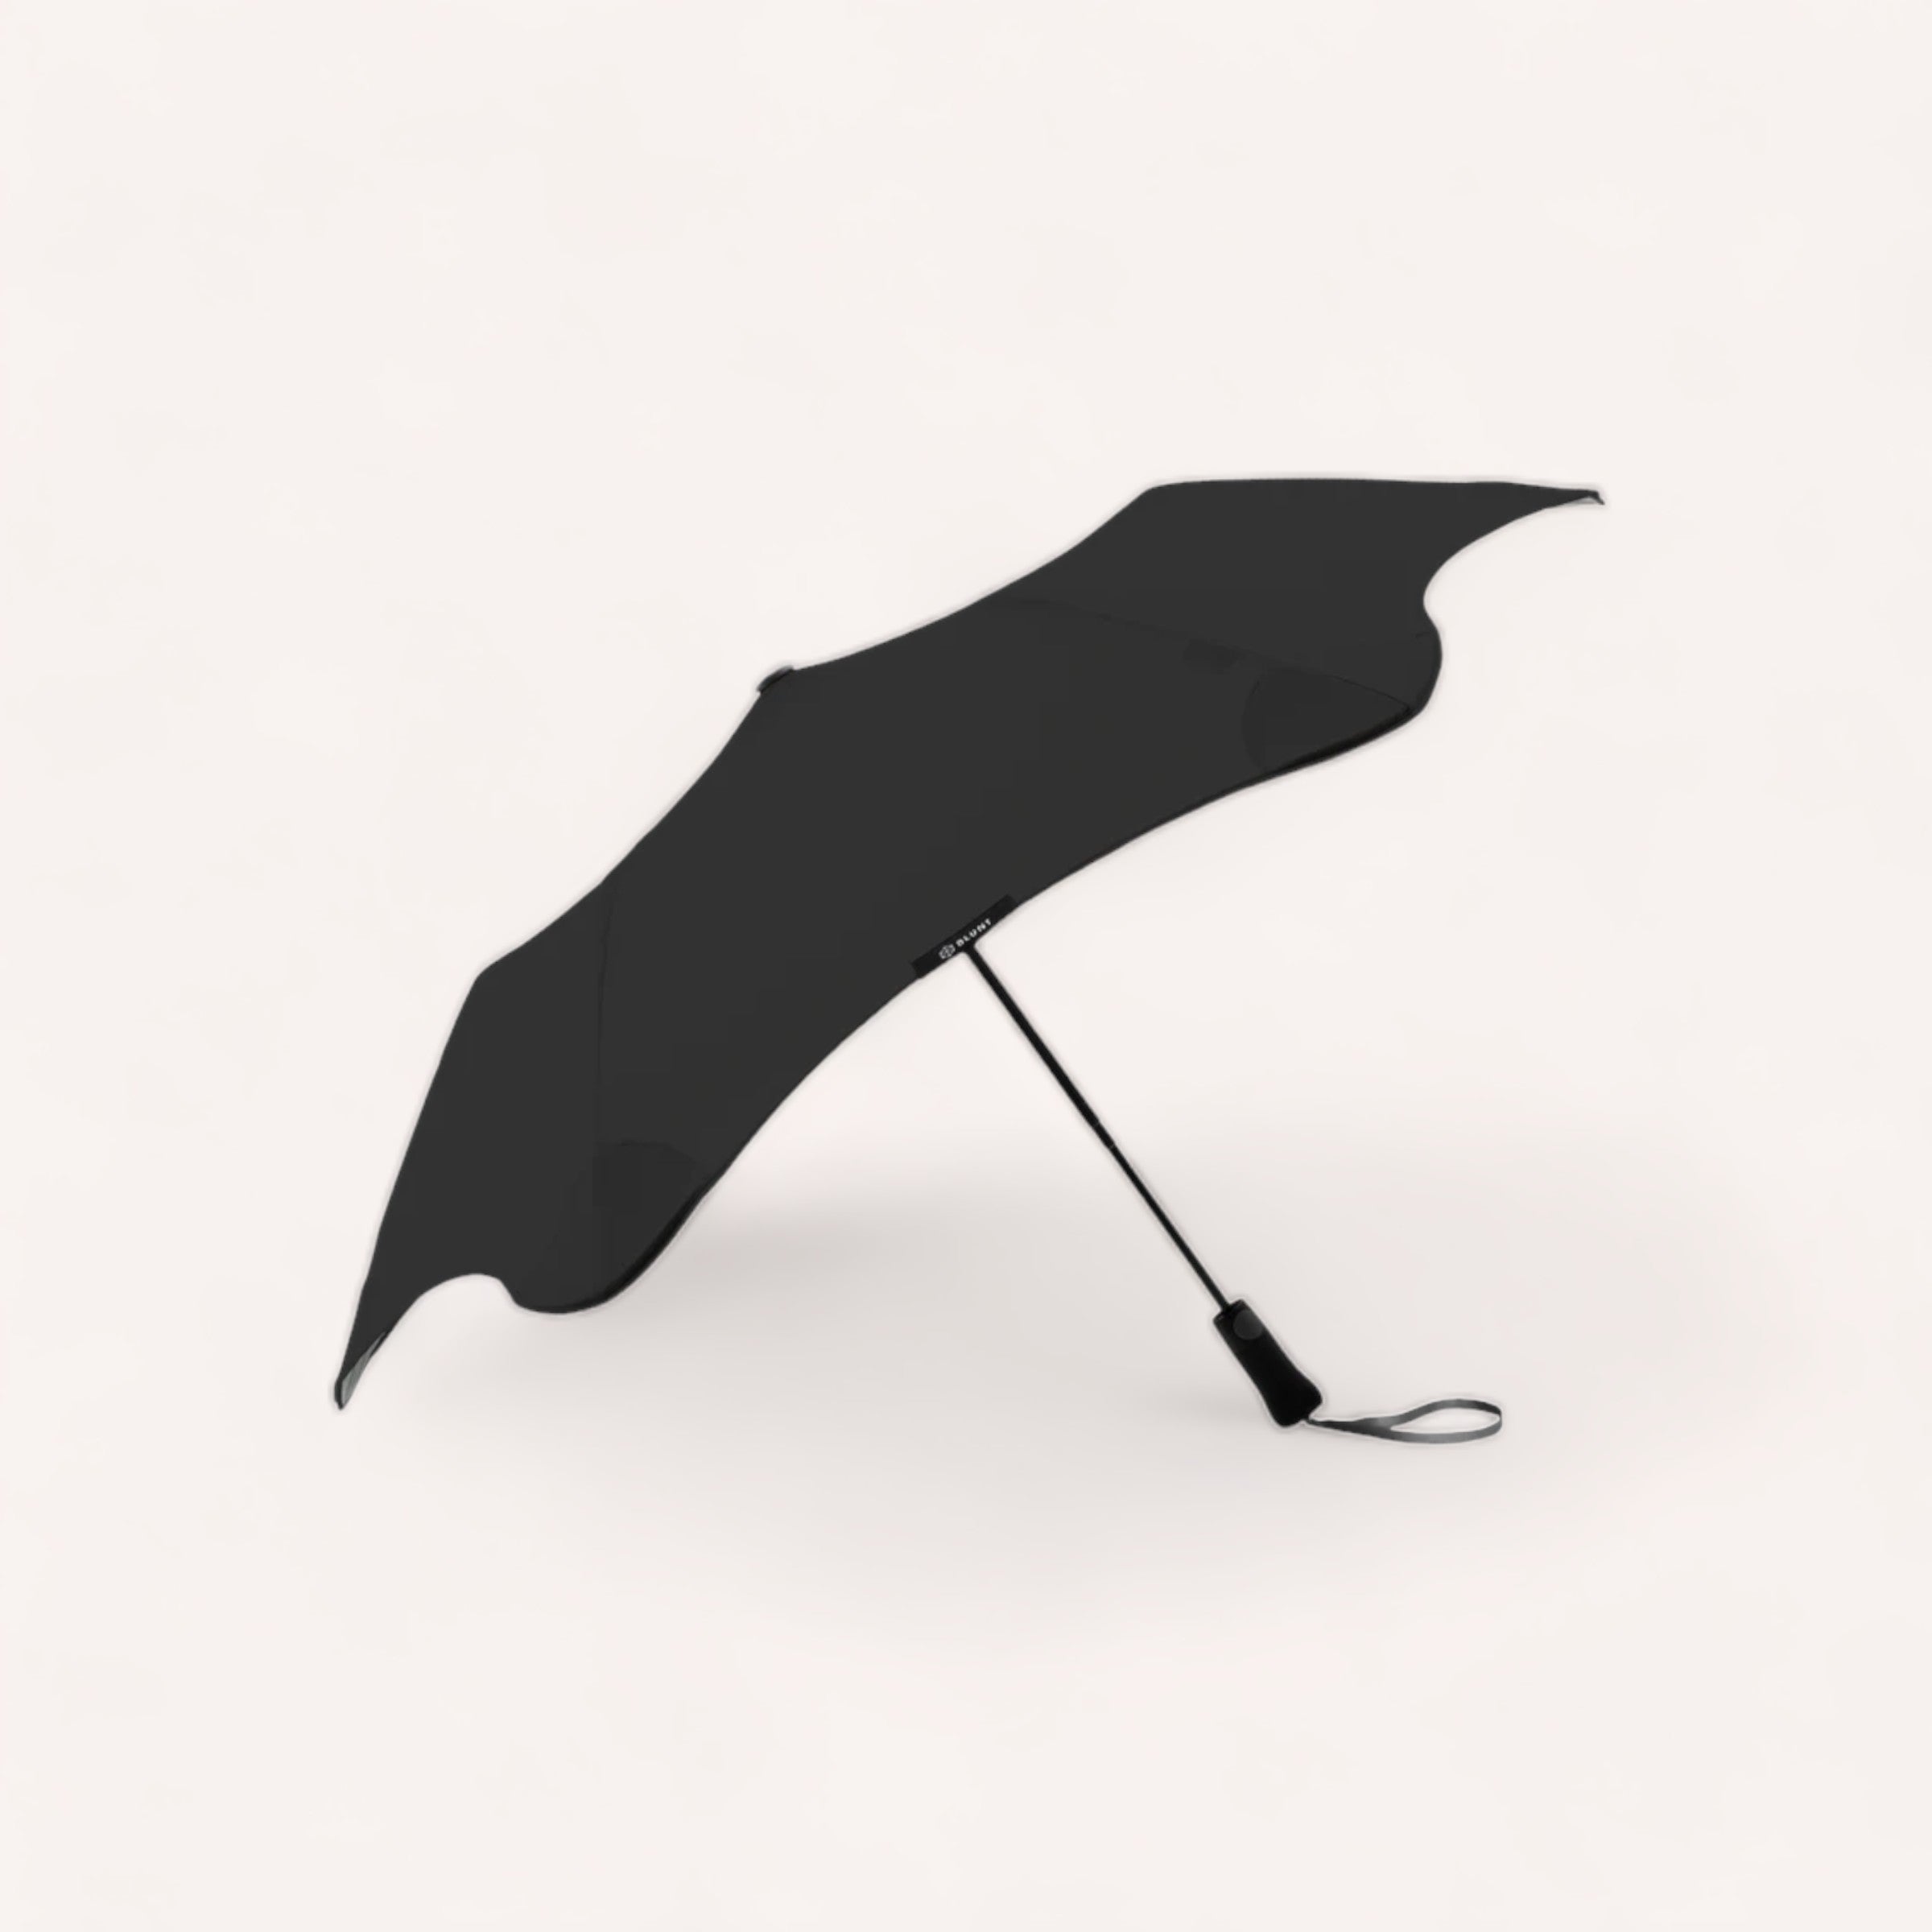 A sleek BLUNT Metro umbrella with an auto-open canopy opened on a white background, seemingly caught mid-motion as if tossed by a gentle breeze.